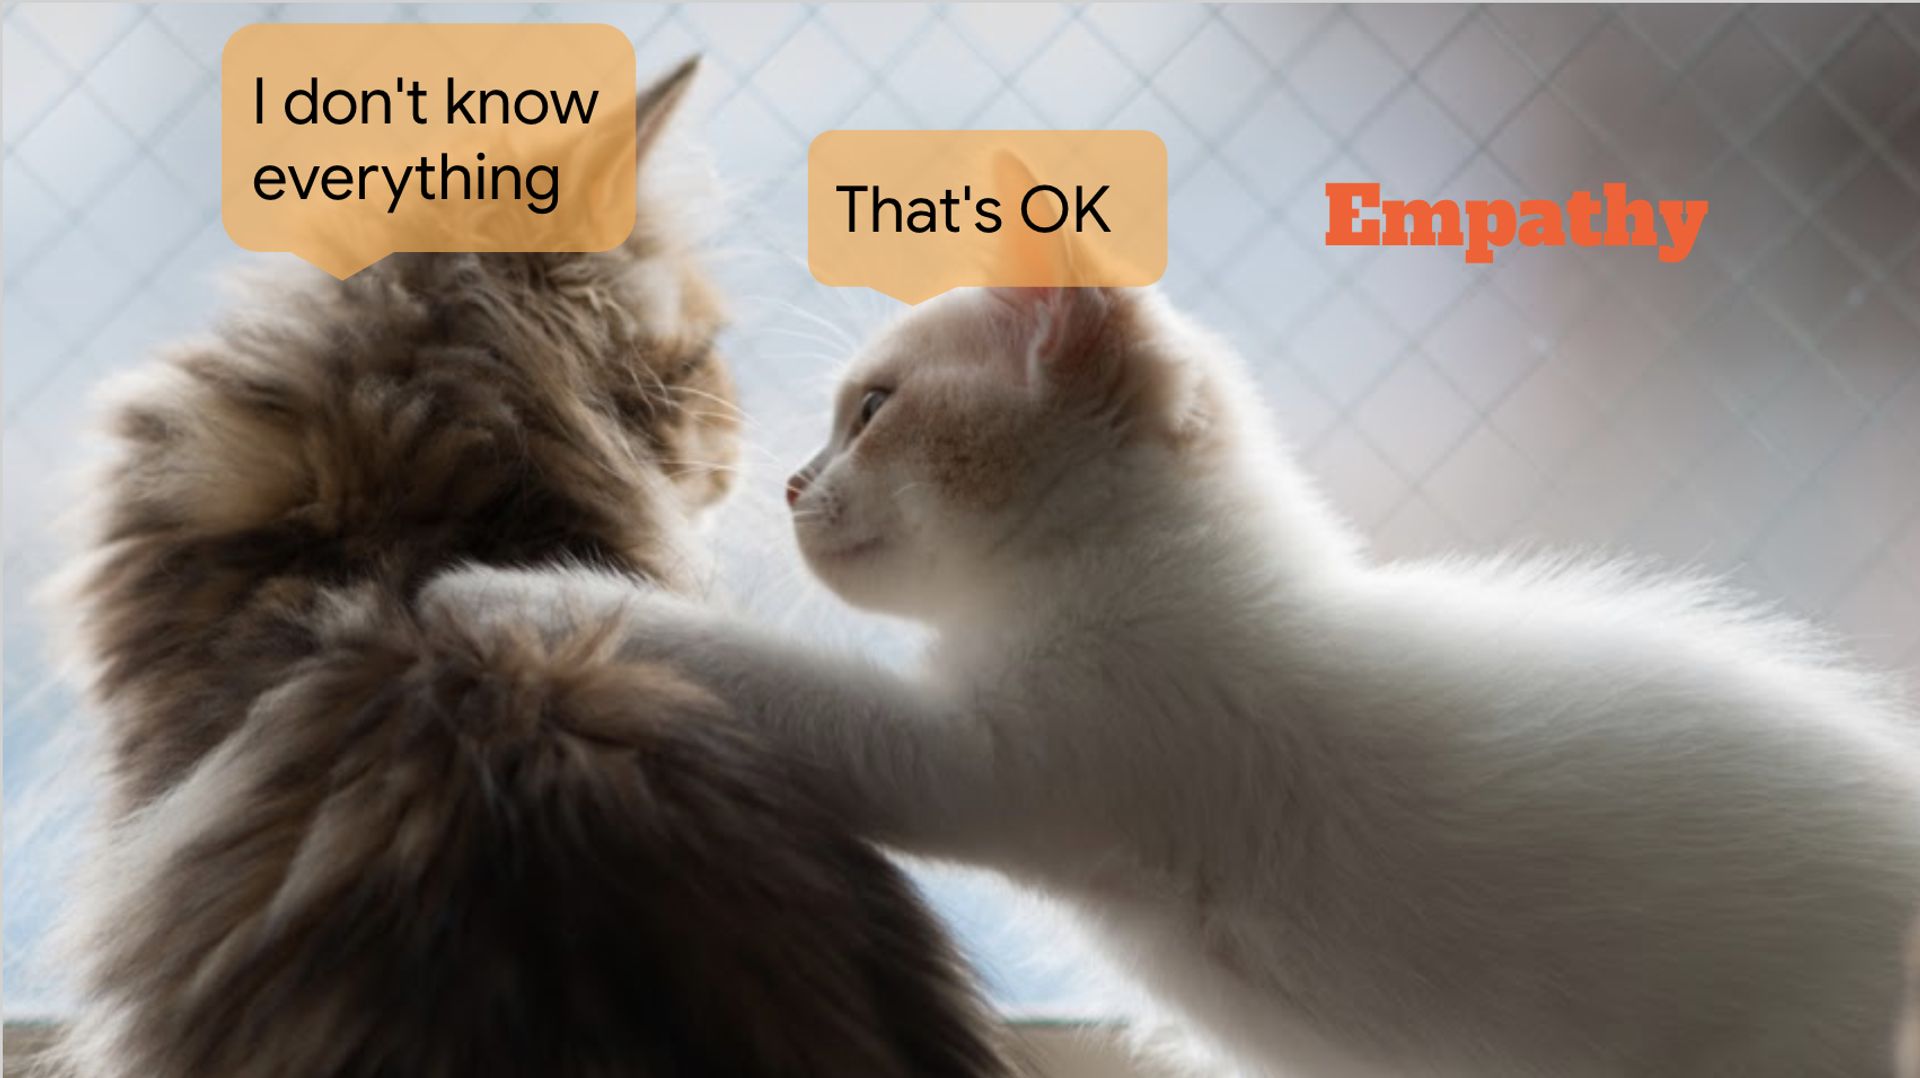 Photo of two cats. One says “I don’t know everything”. The other says “That’s OK”.